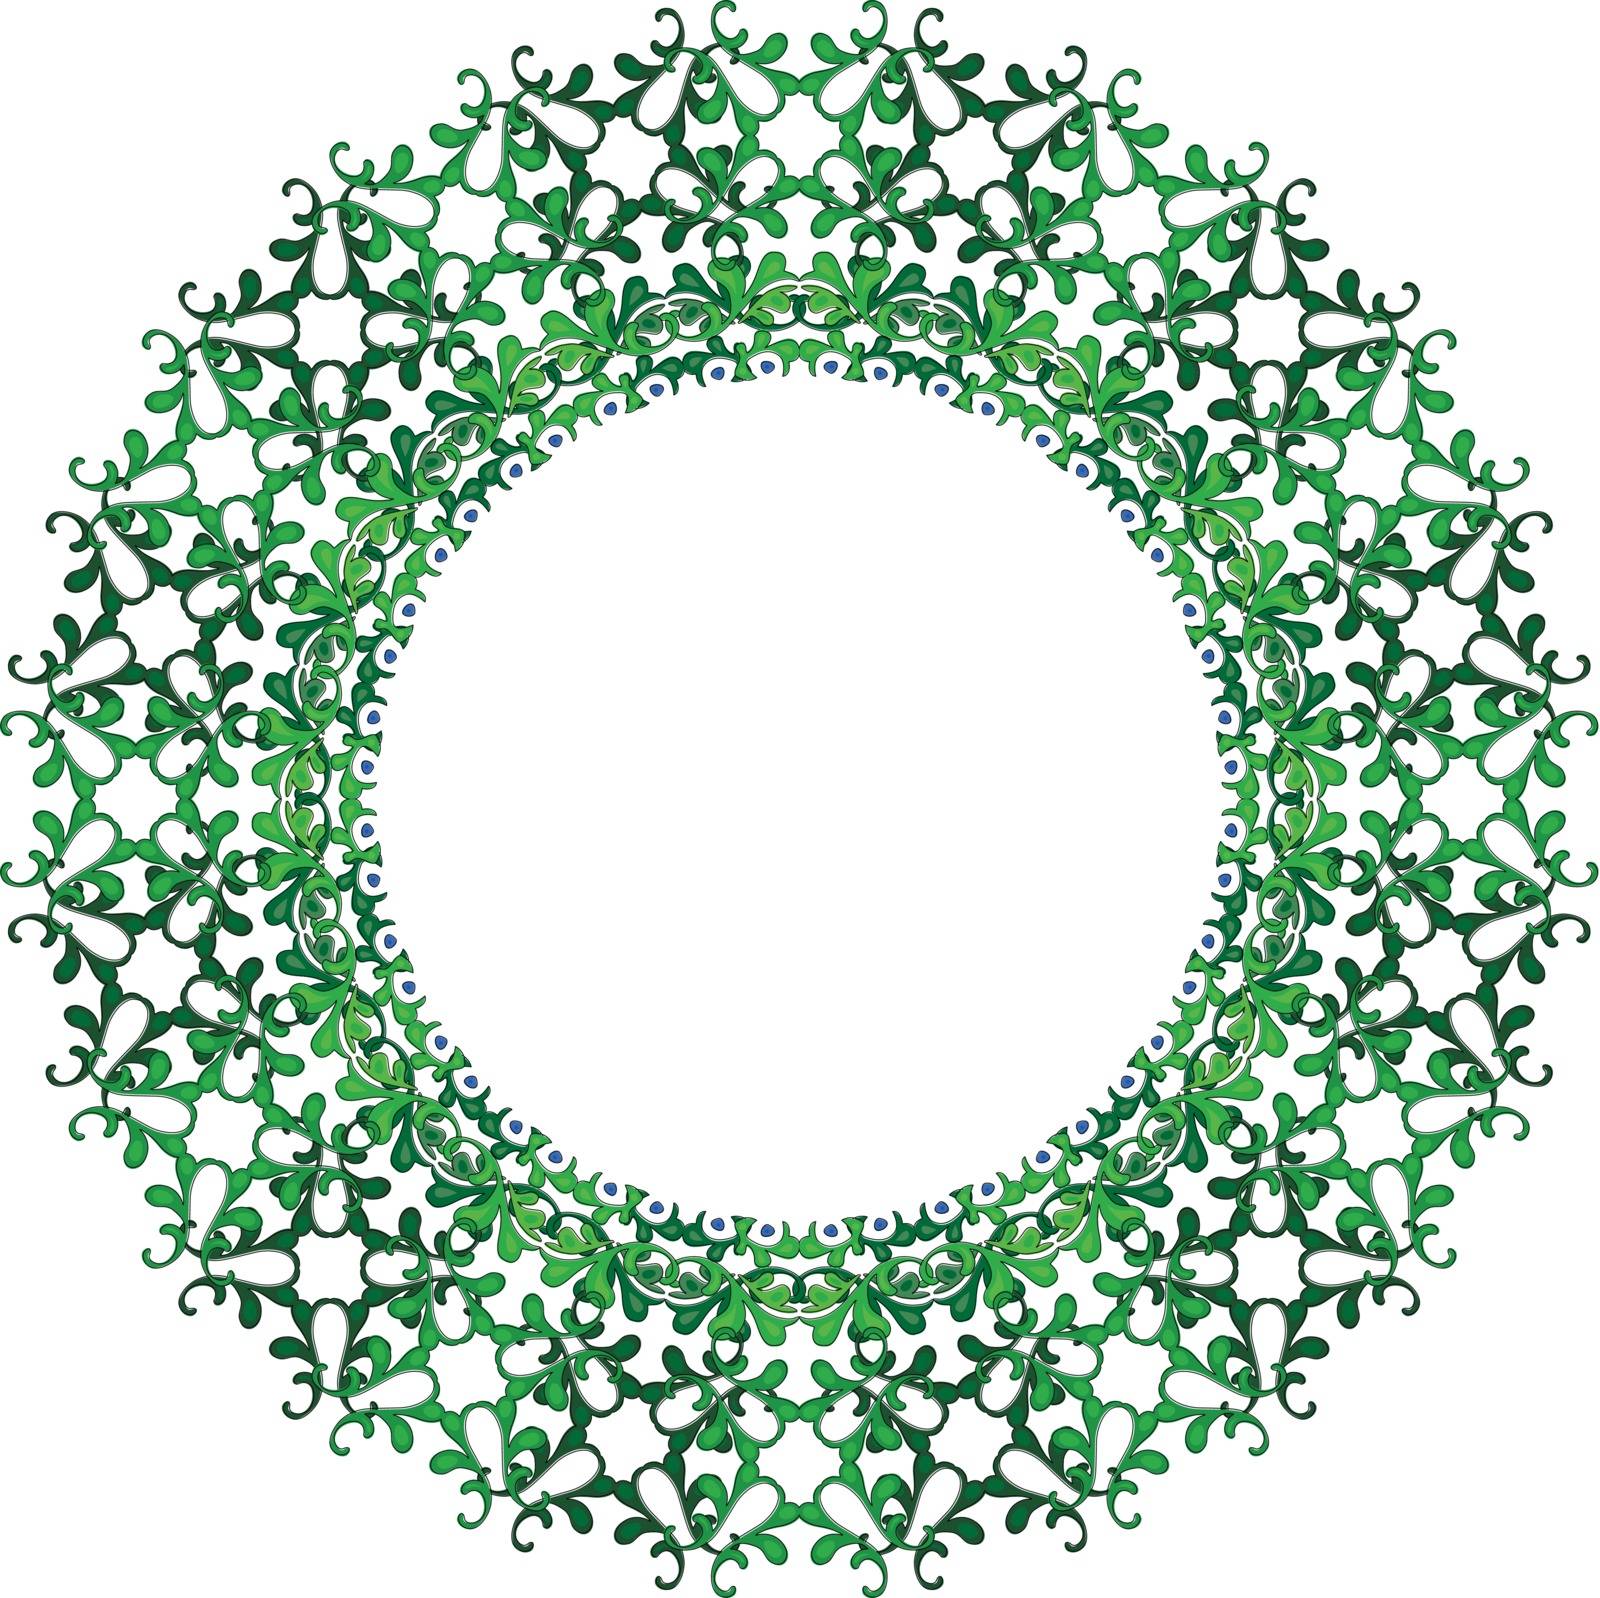 Decorative illustrated circle frame made of green elements